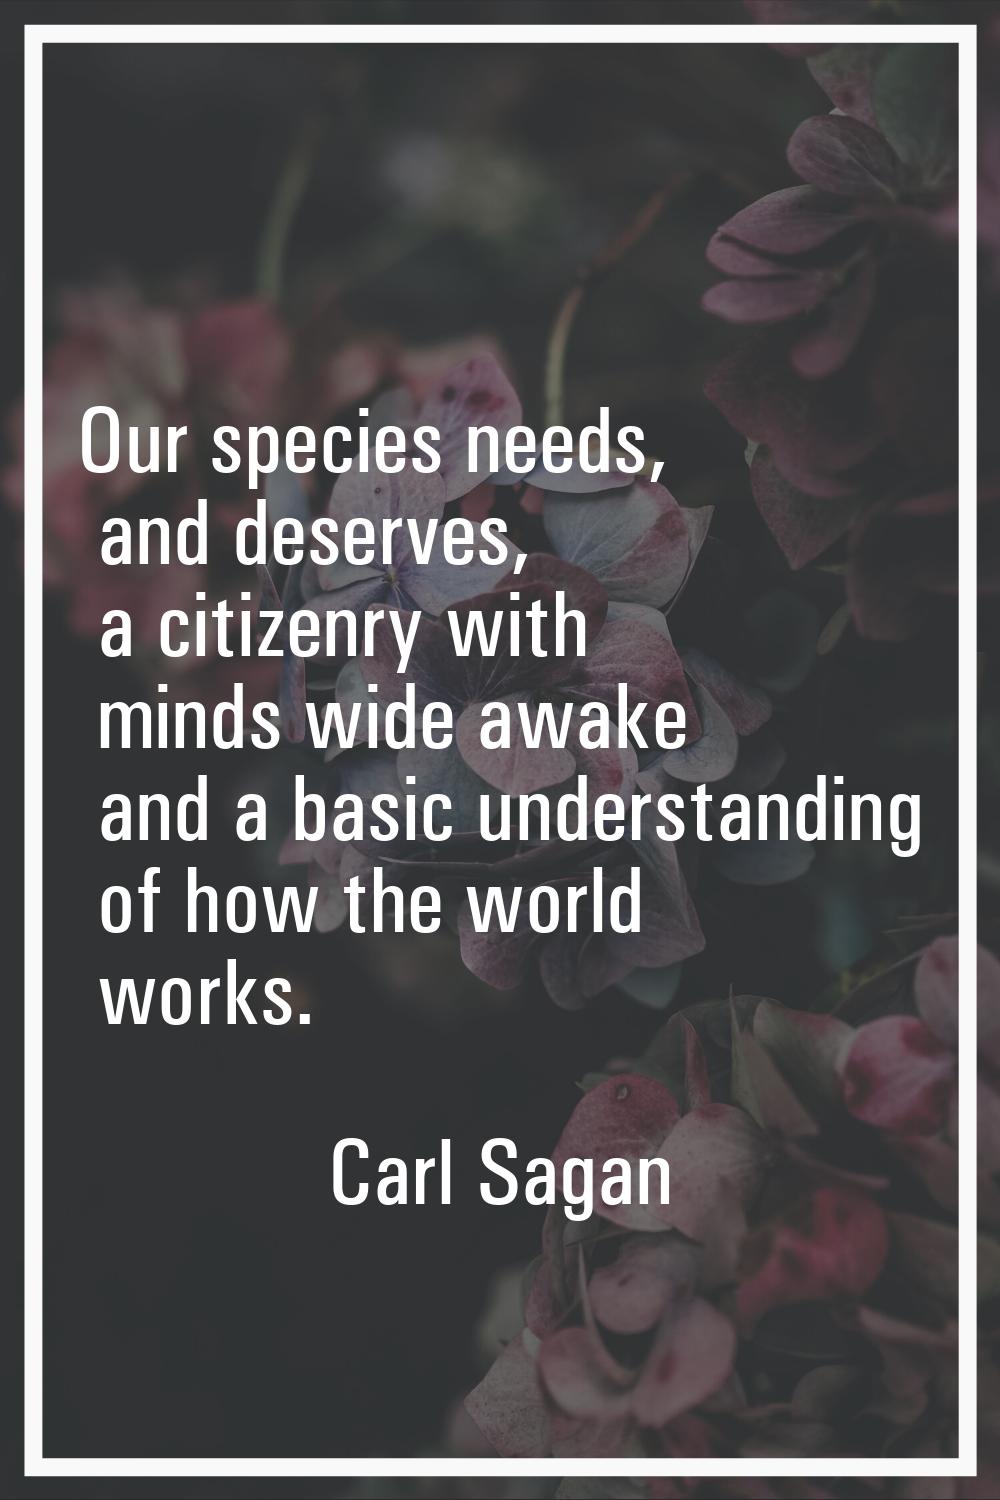 Our species needs, and deserves, a citizenry with minds wide awake and a basic understanding of how